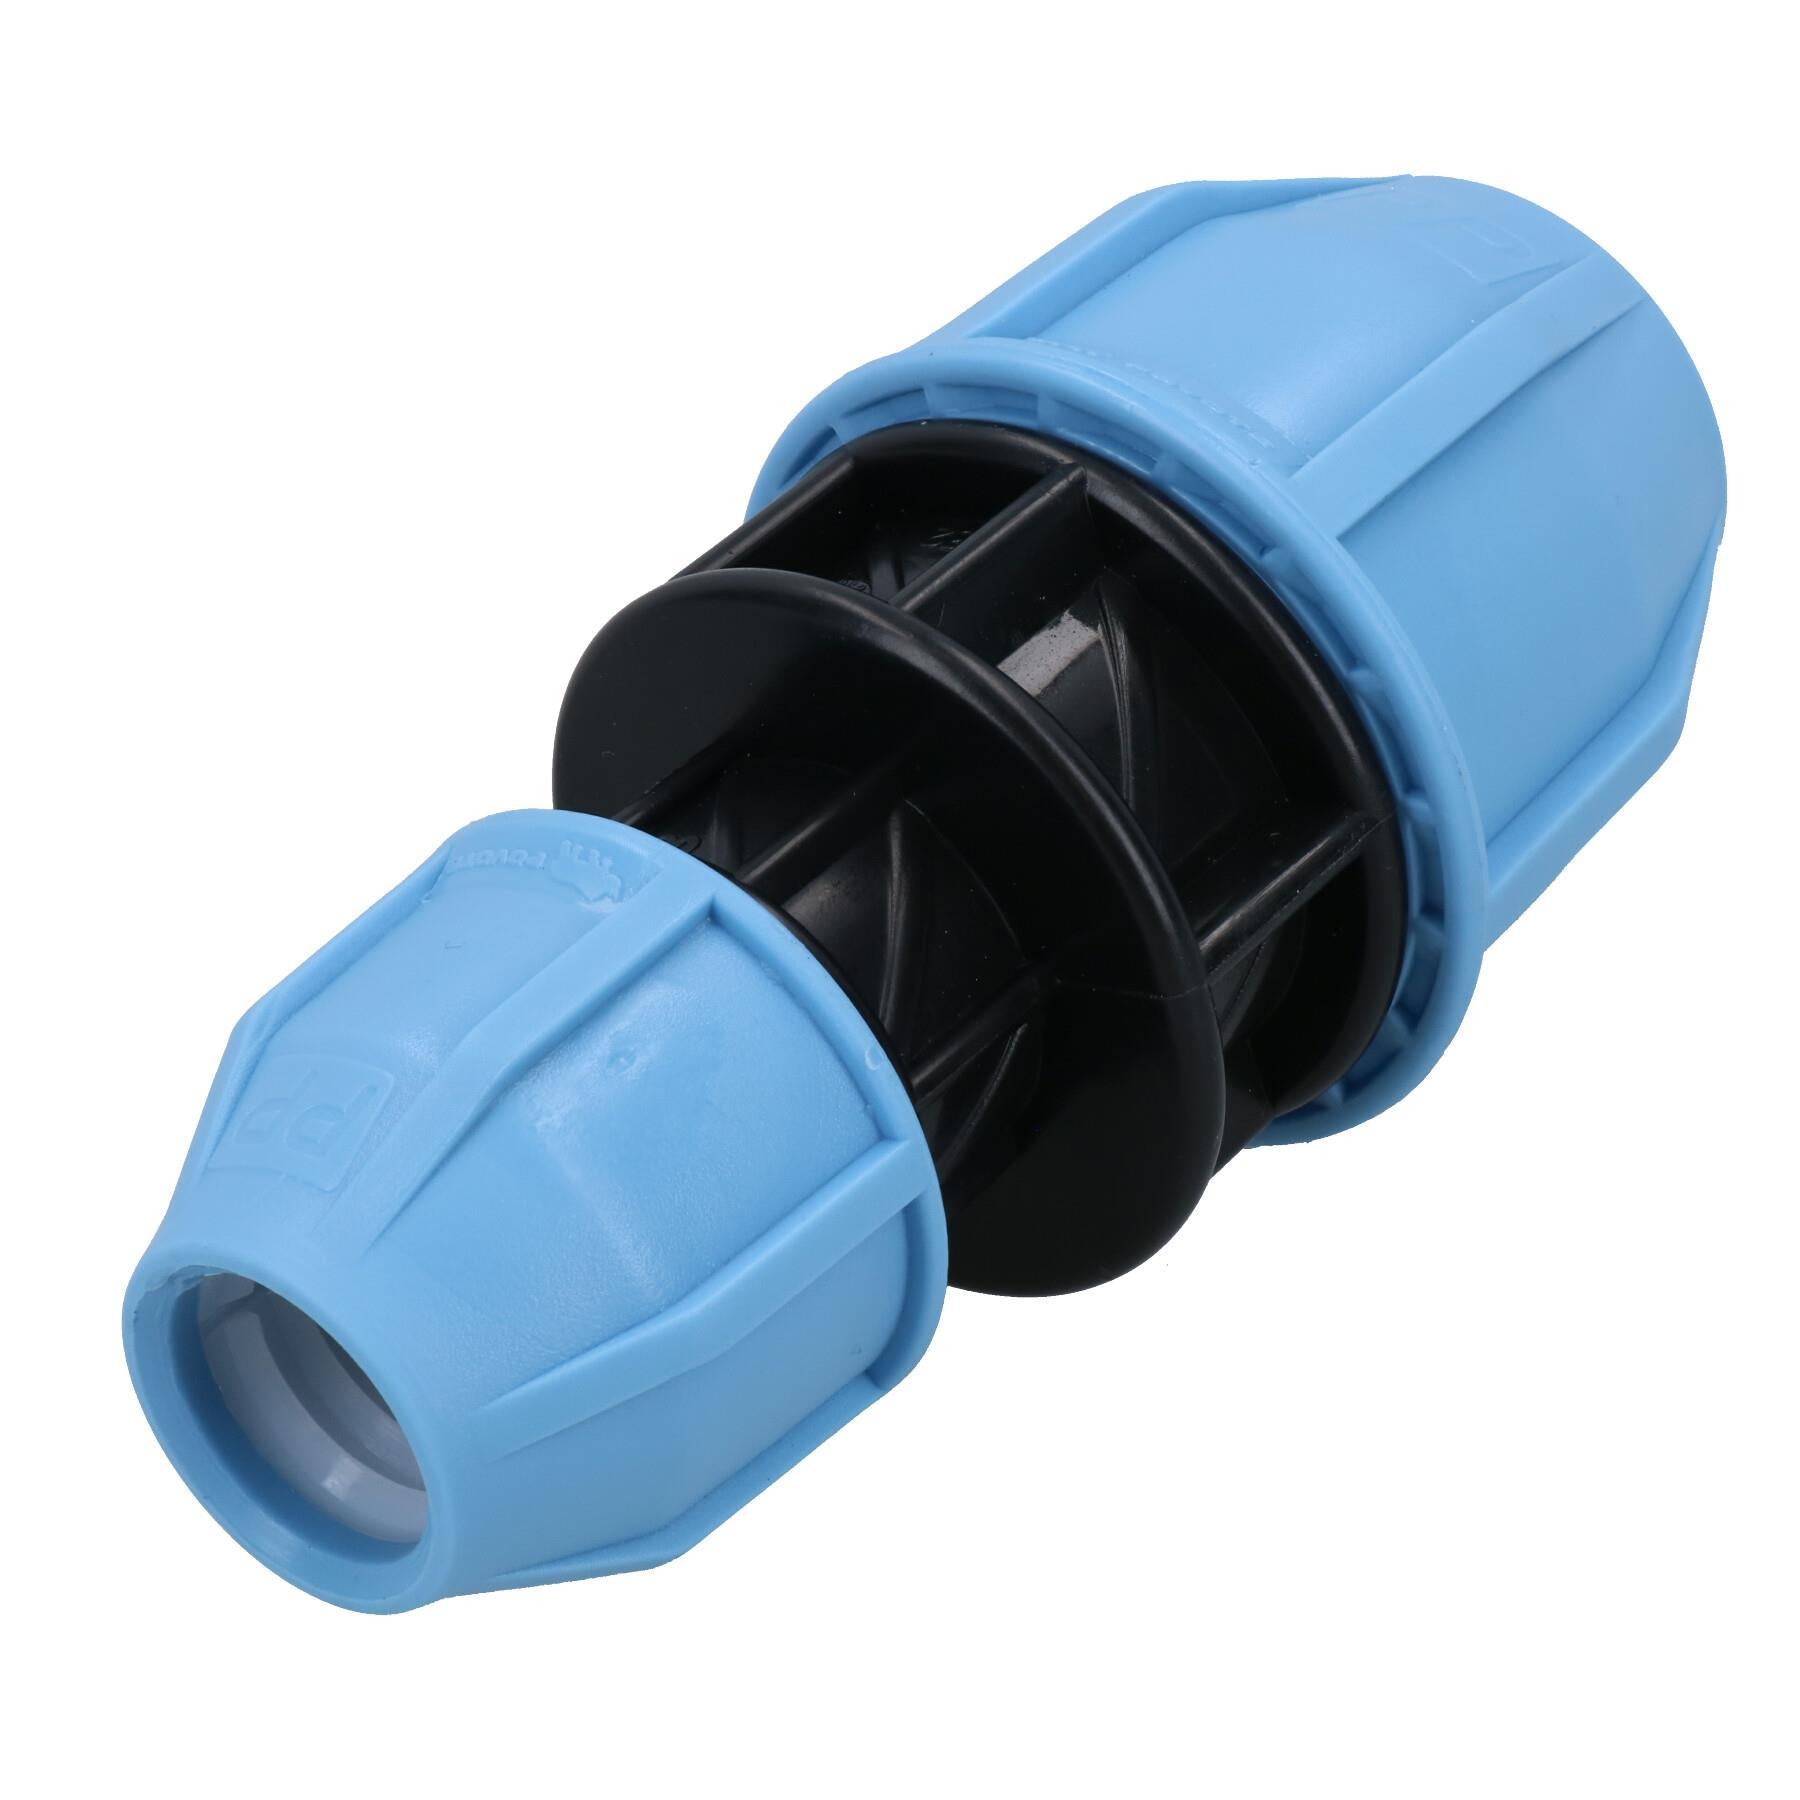 32mm x 20mm MDPE Reducing Coupler Pipe Union Cold Water System Fitting